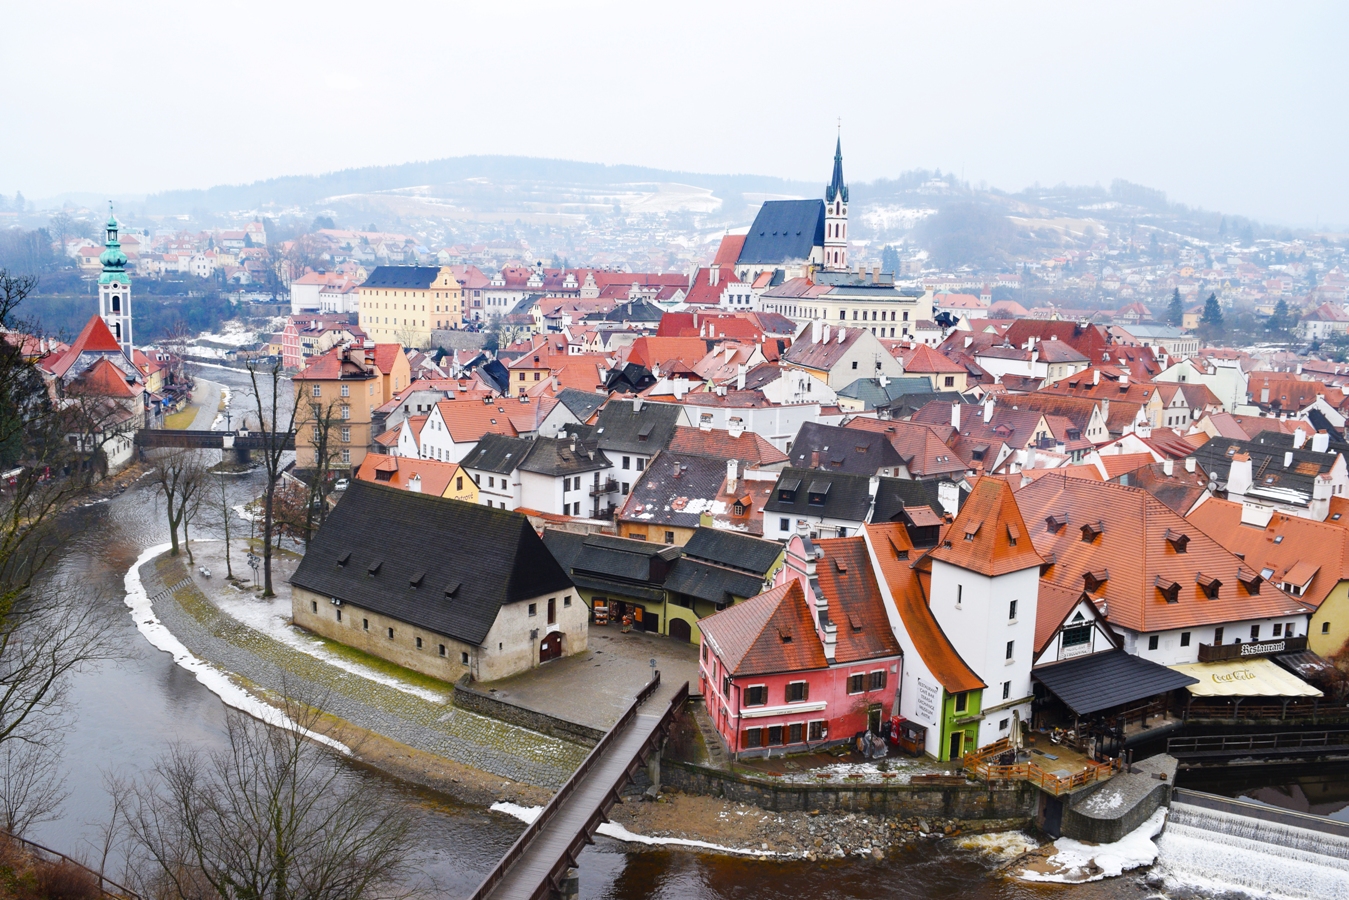 Český Krumlov: Picture-Perfect Small Town You Must See | The Cheerful Wanderer